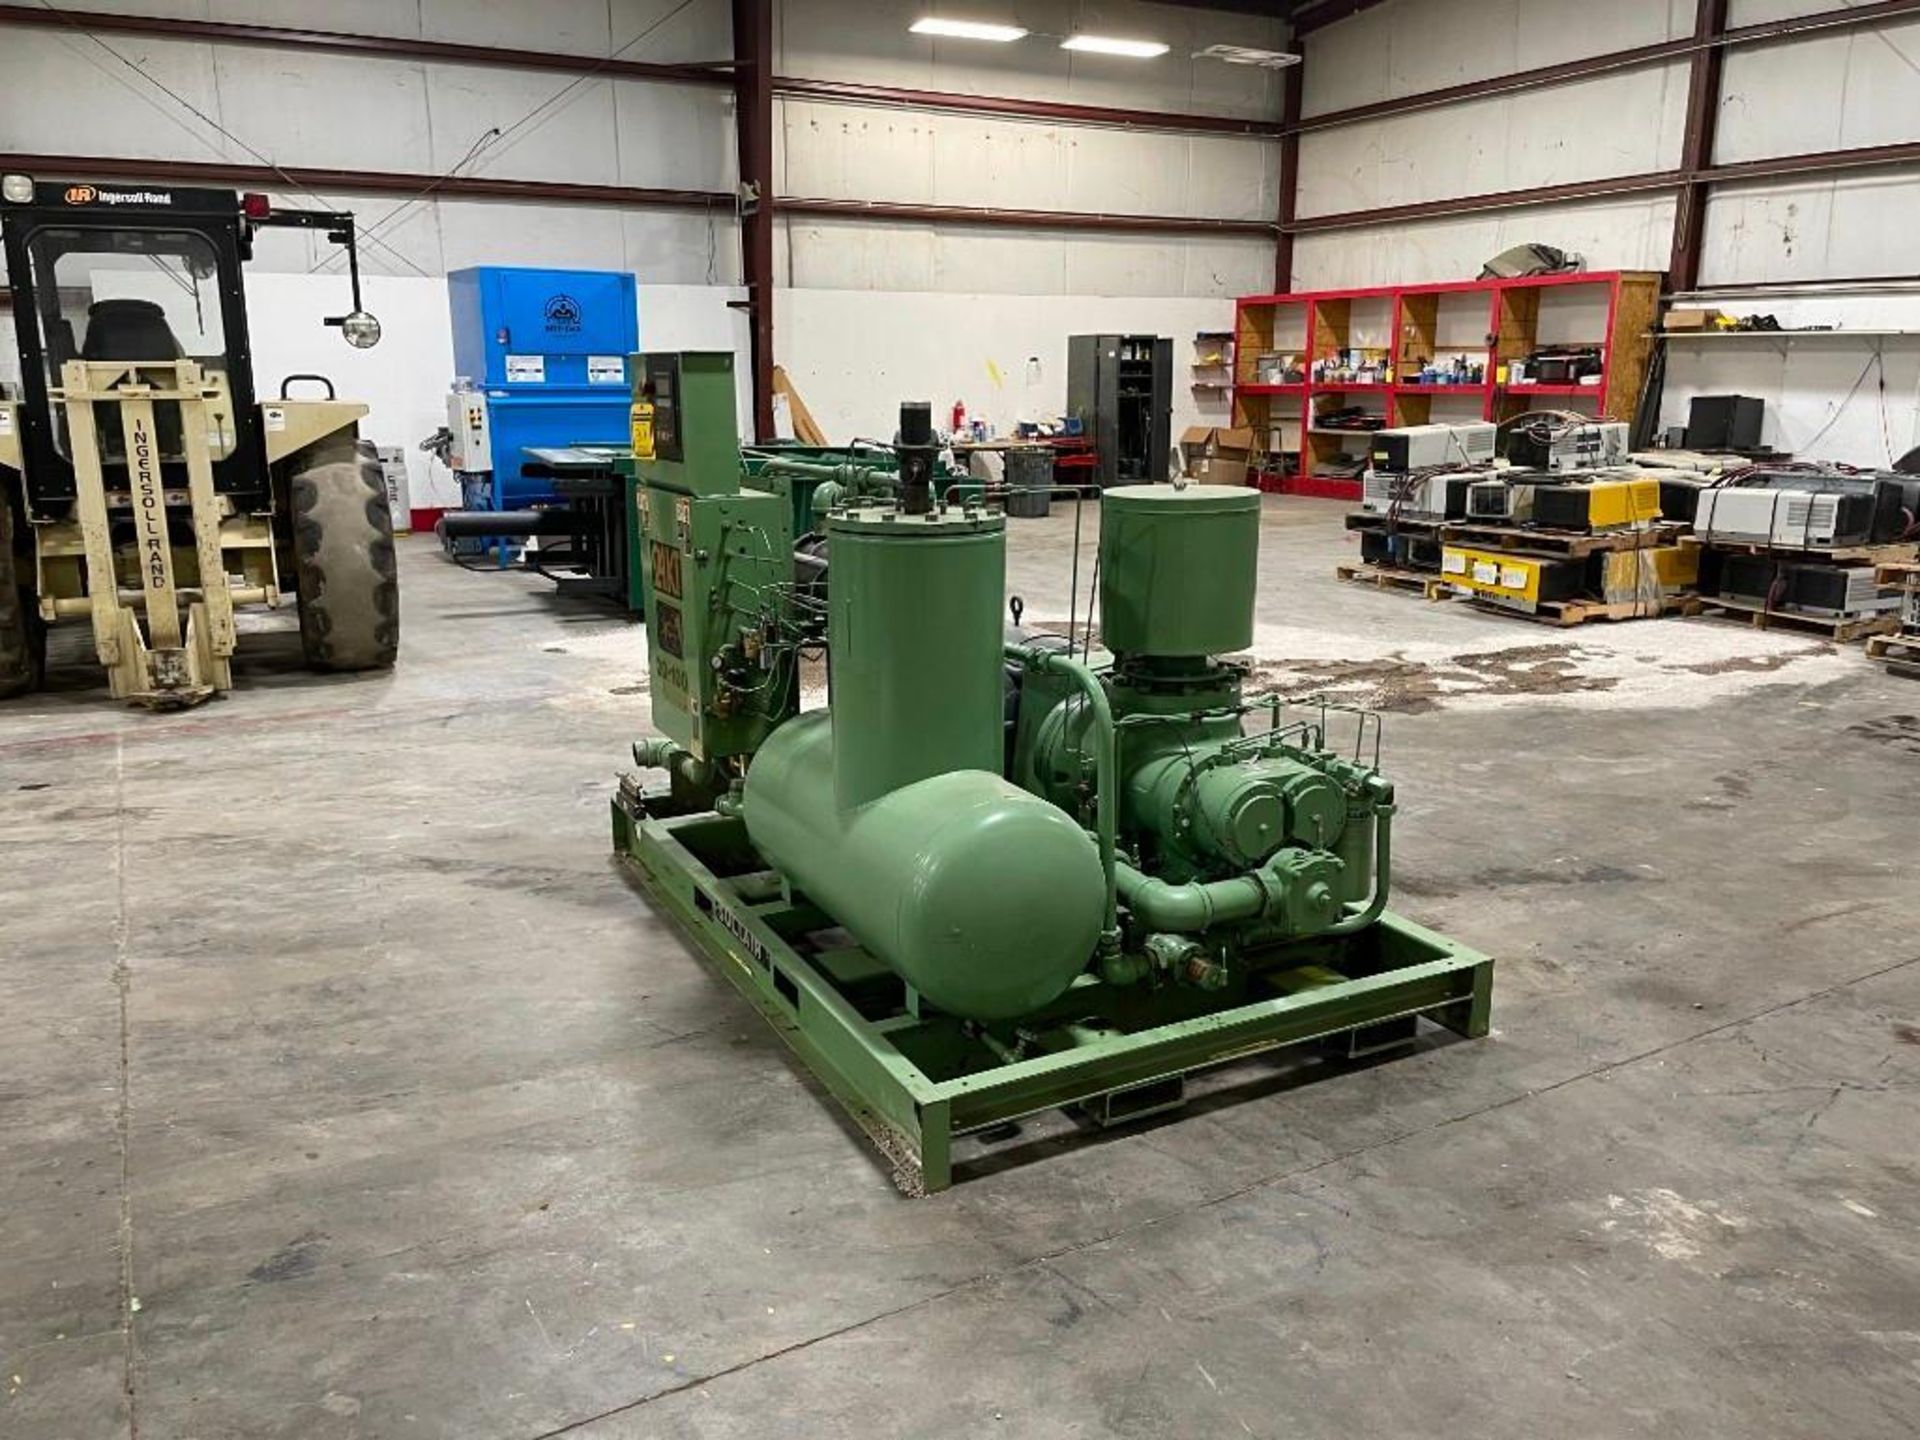 SULLAIR 100HP AIR COMPRESSOR, MODEL 20-100H WCAC-24KT, S/N 003-140991, 115/125 PSIG - Image 4 of 4